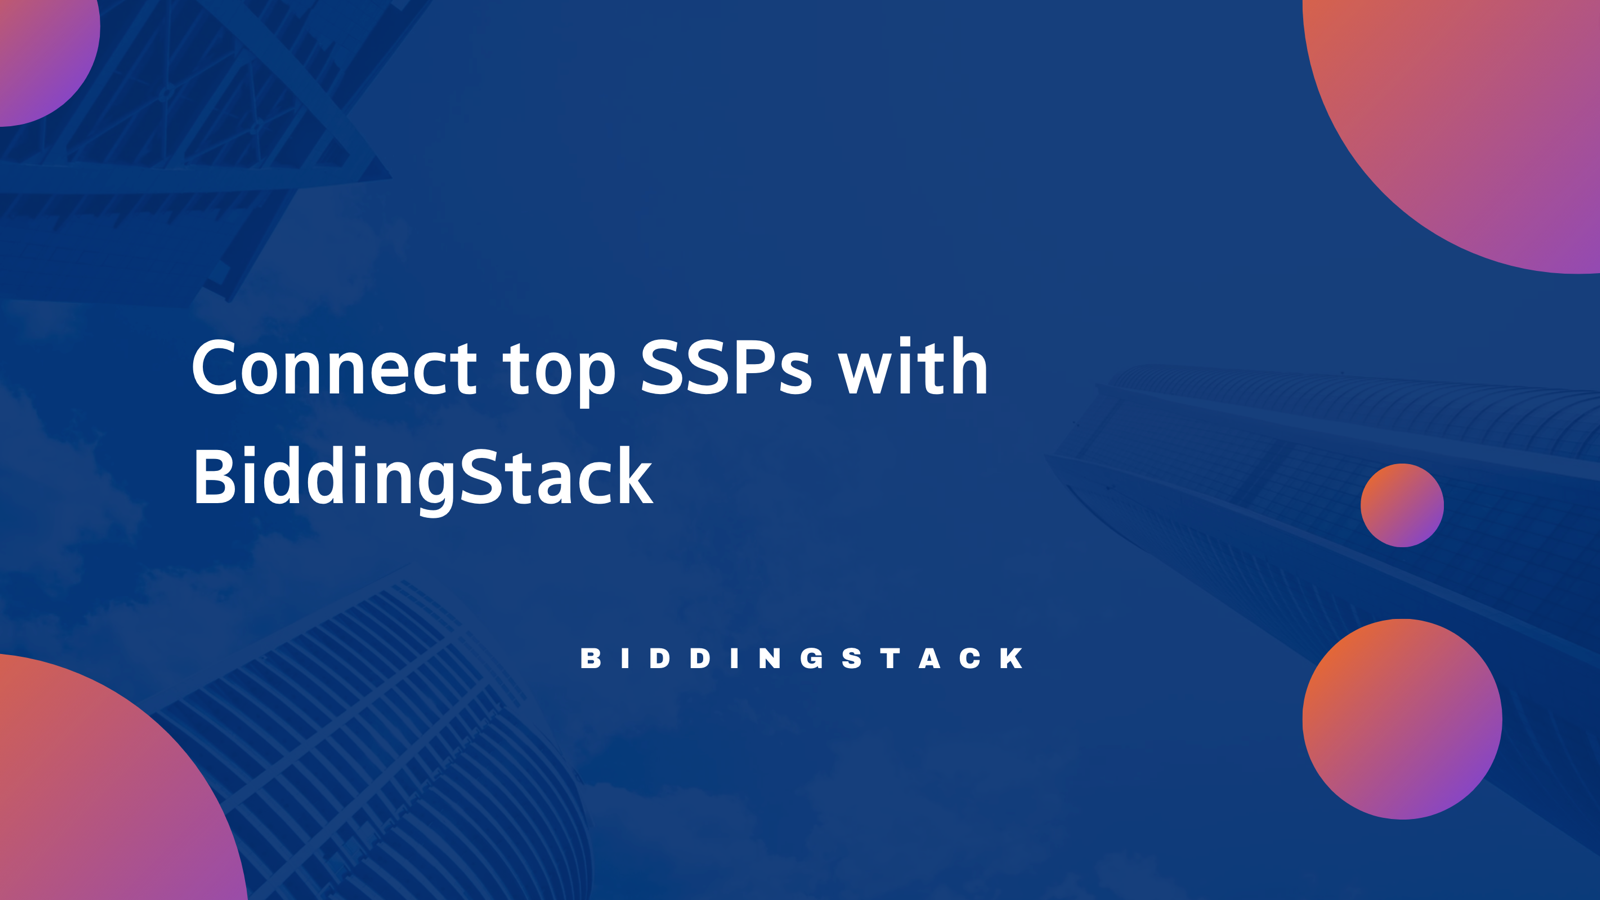 Connect top SSPs with BiddingStack